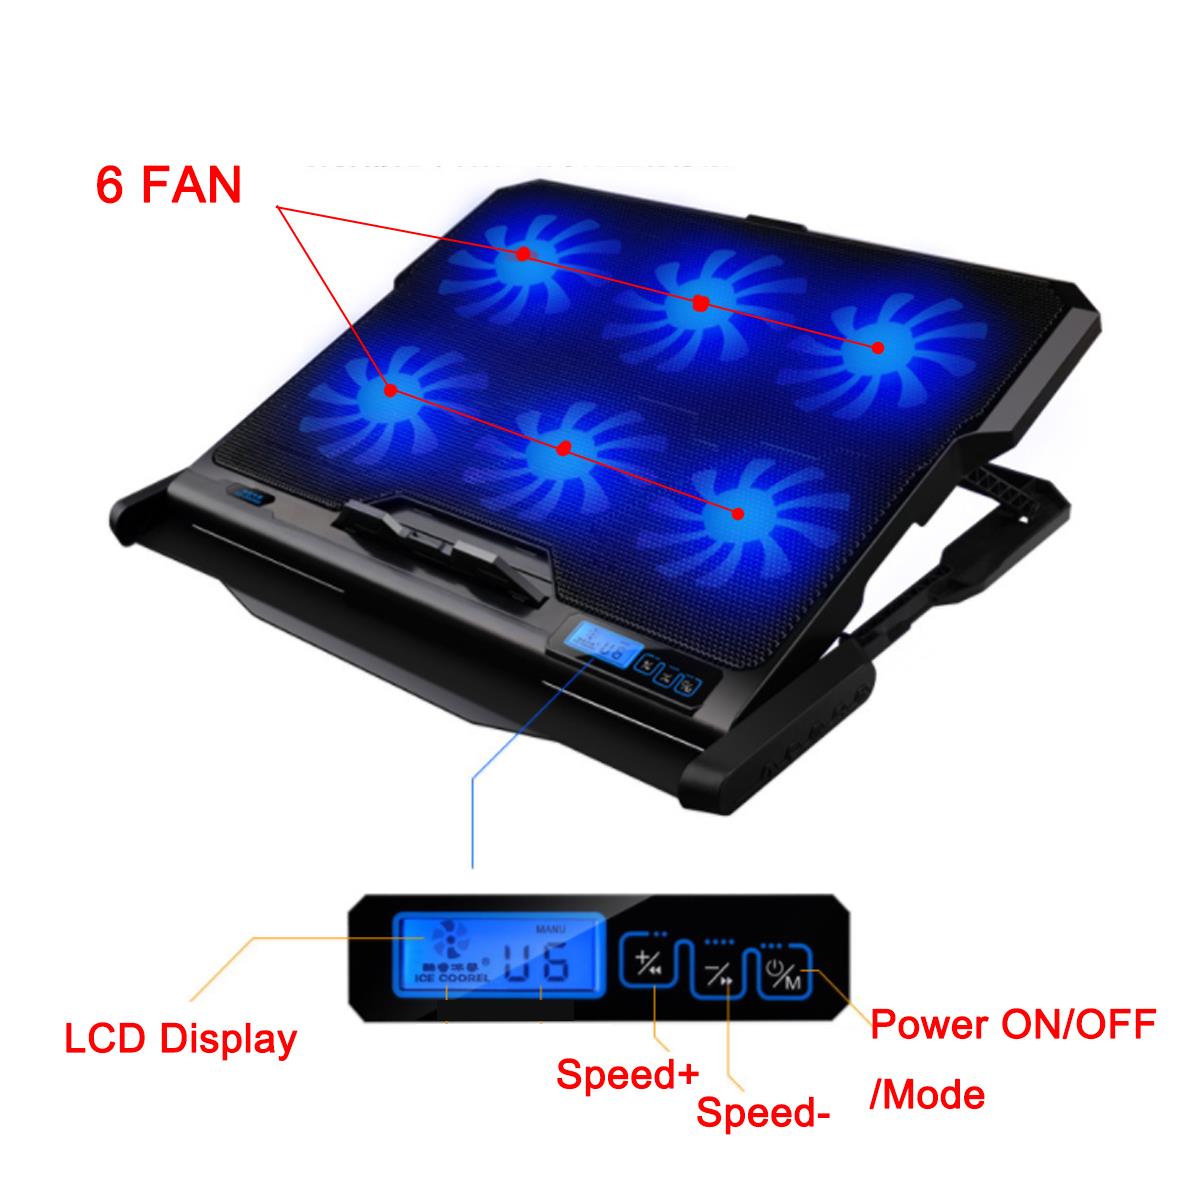 Adjustable Laptop Cooling Pad USB Cooler 6 Cooling Fans With Stand For 12-15.6 inch Laptop Use 14